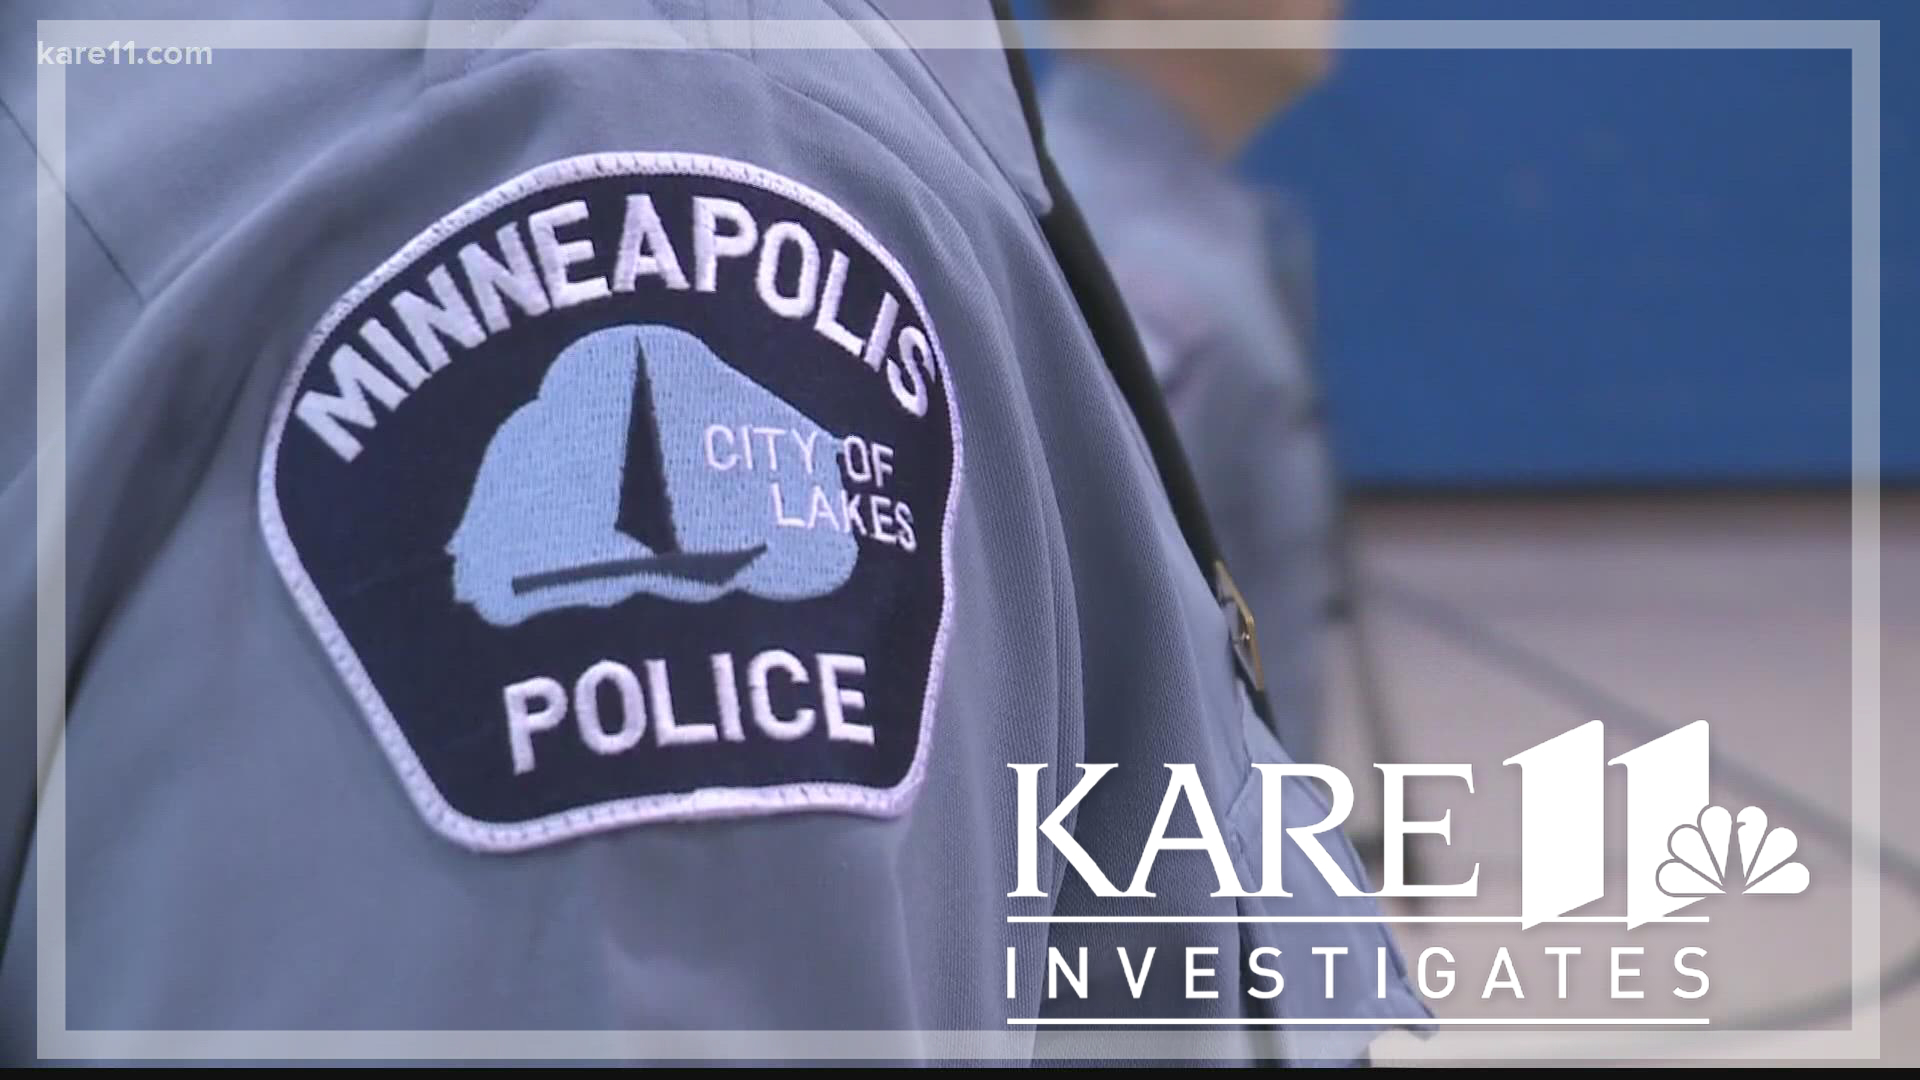 Before the landmark human rights report, KARE 11 documented how MPD police failed to properly discipline and train cops as they disproportionally targeted minorities